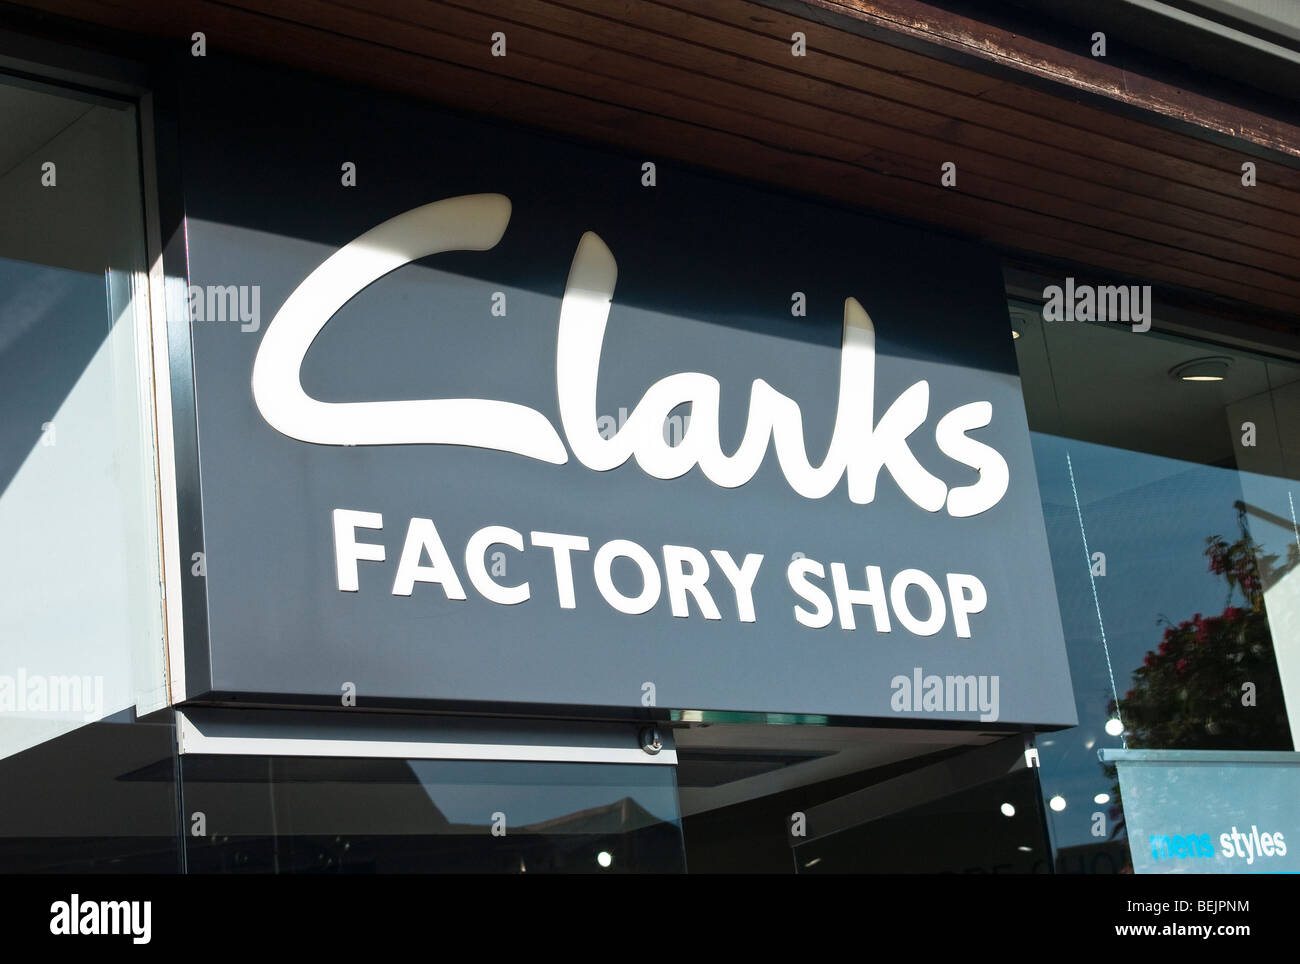 clarks outlet stores in new jersey